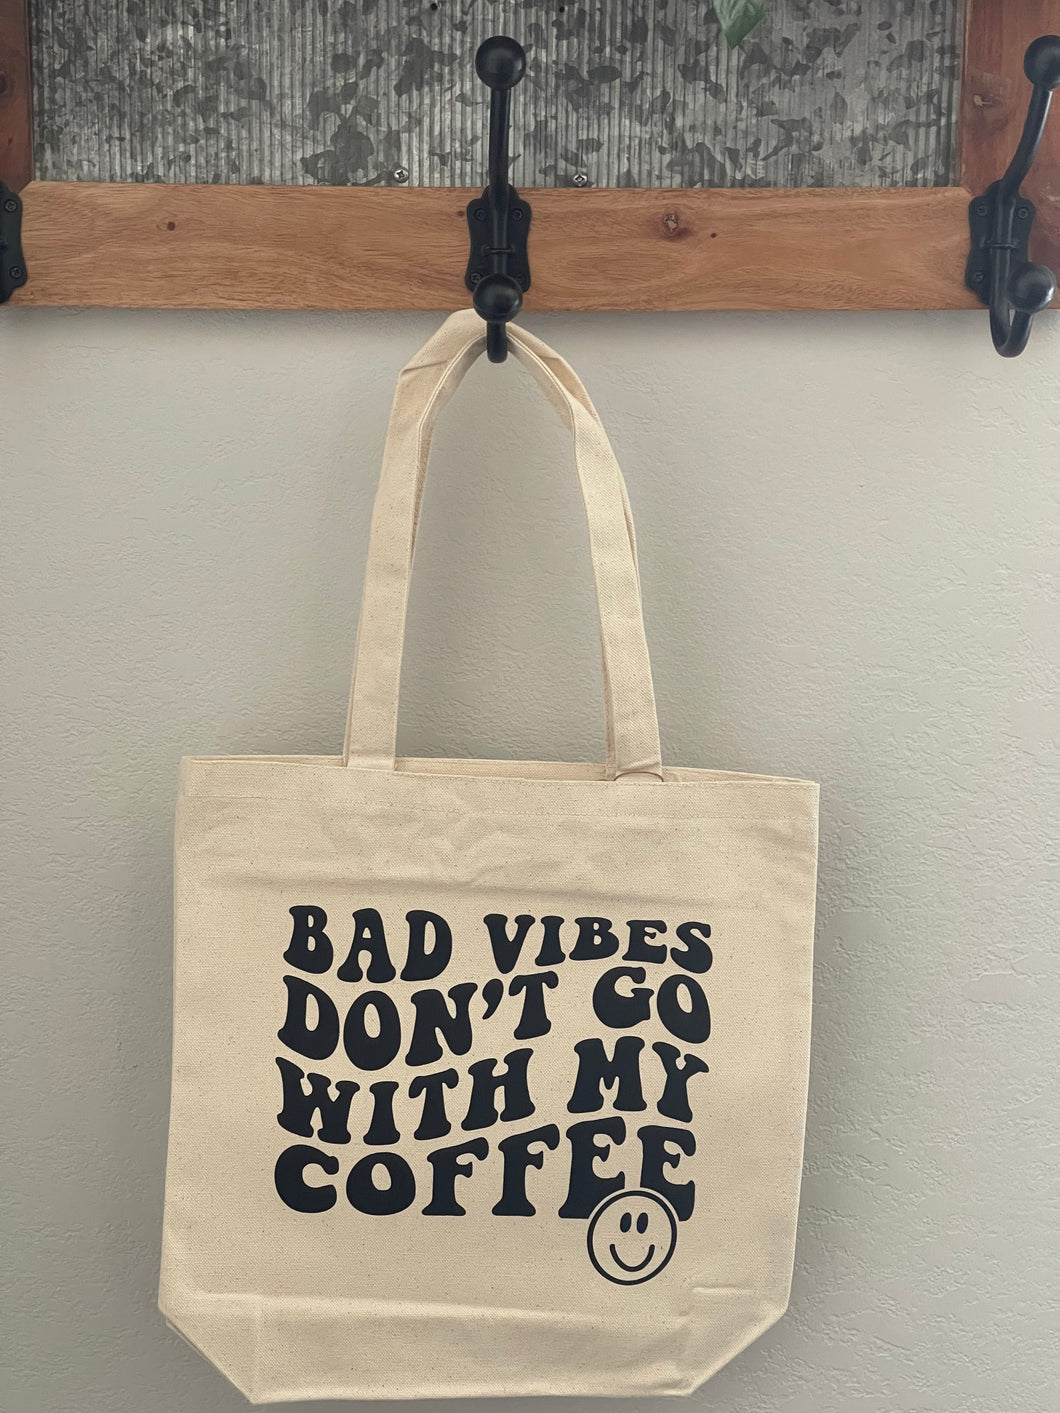 Bad Vibes Don't Go With My Coffee Tote Bag =)